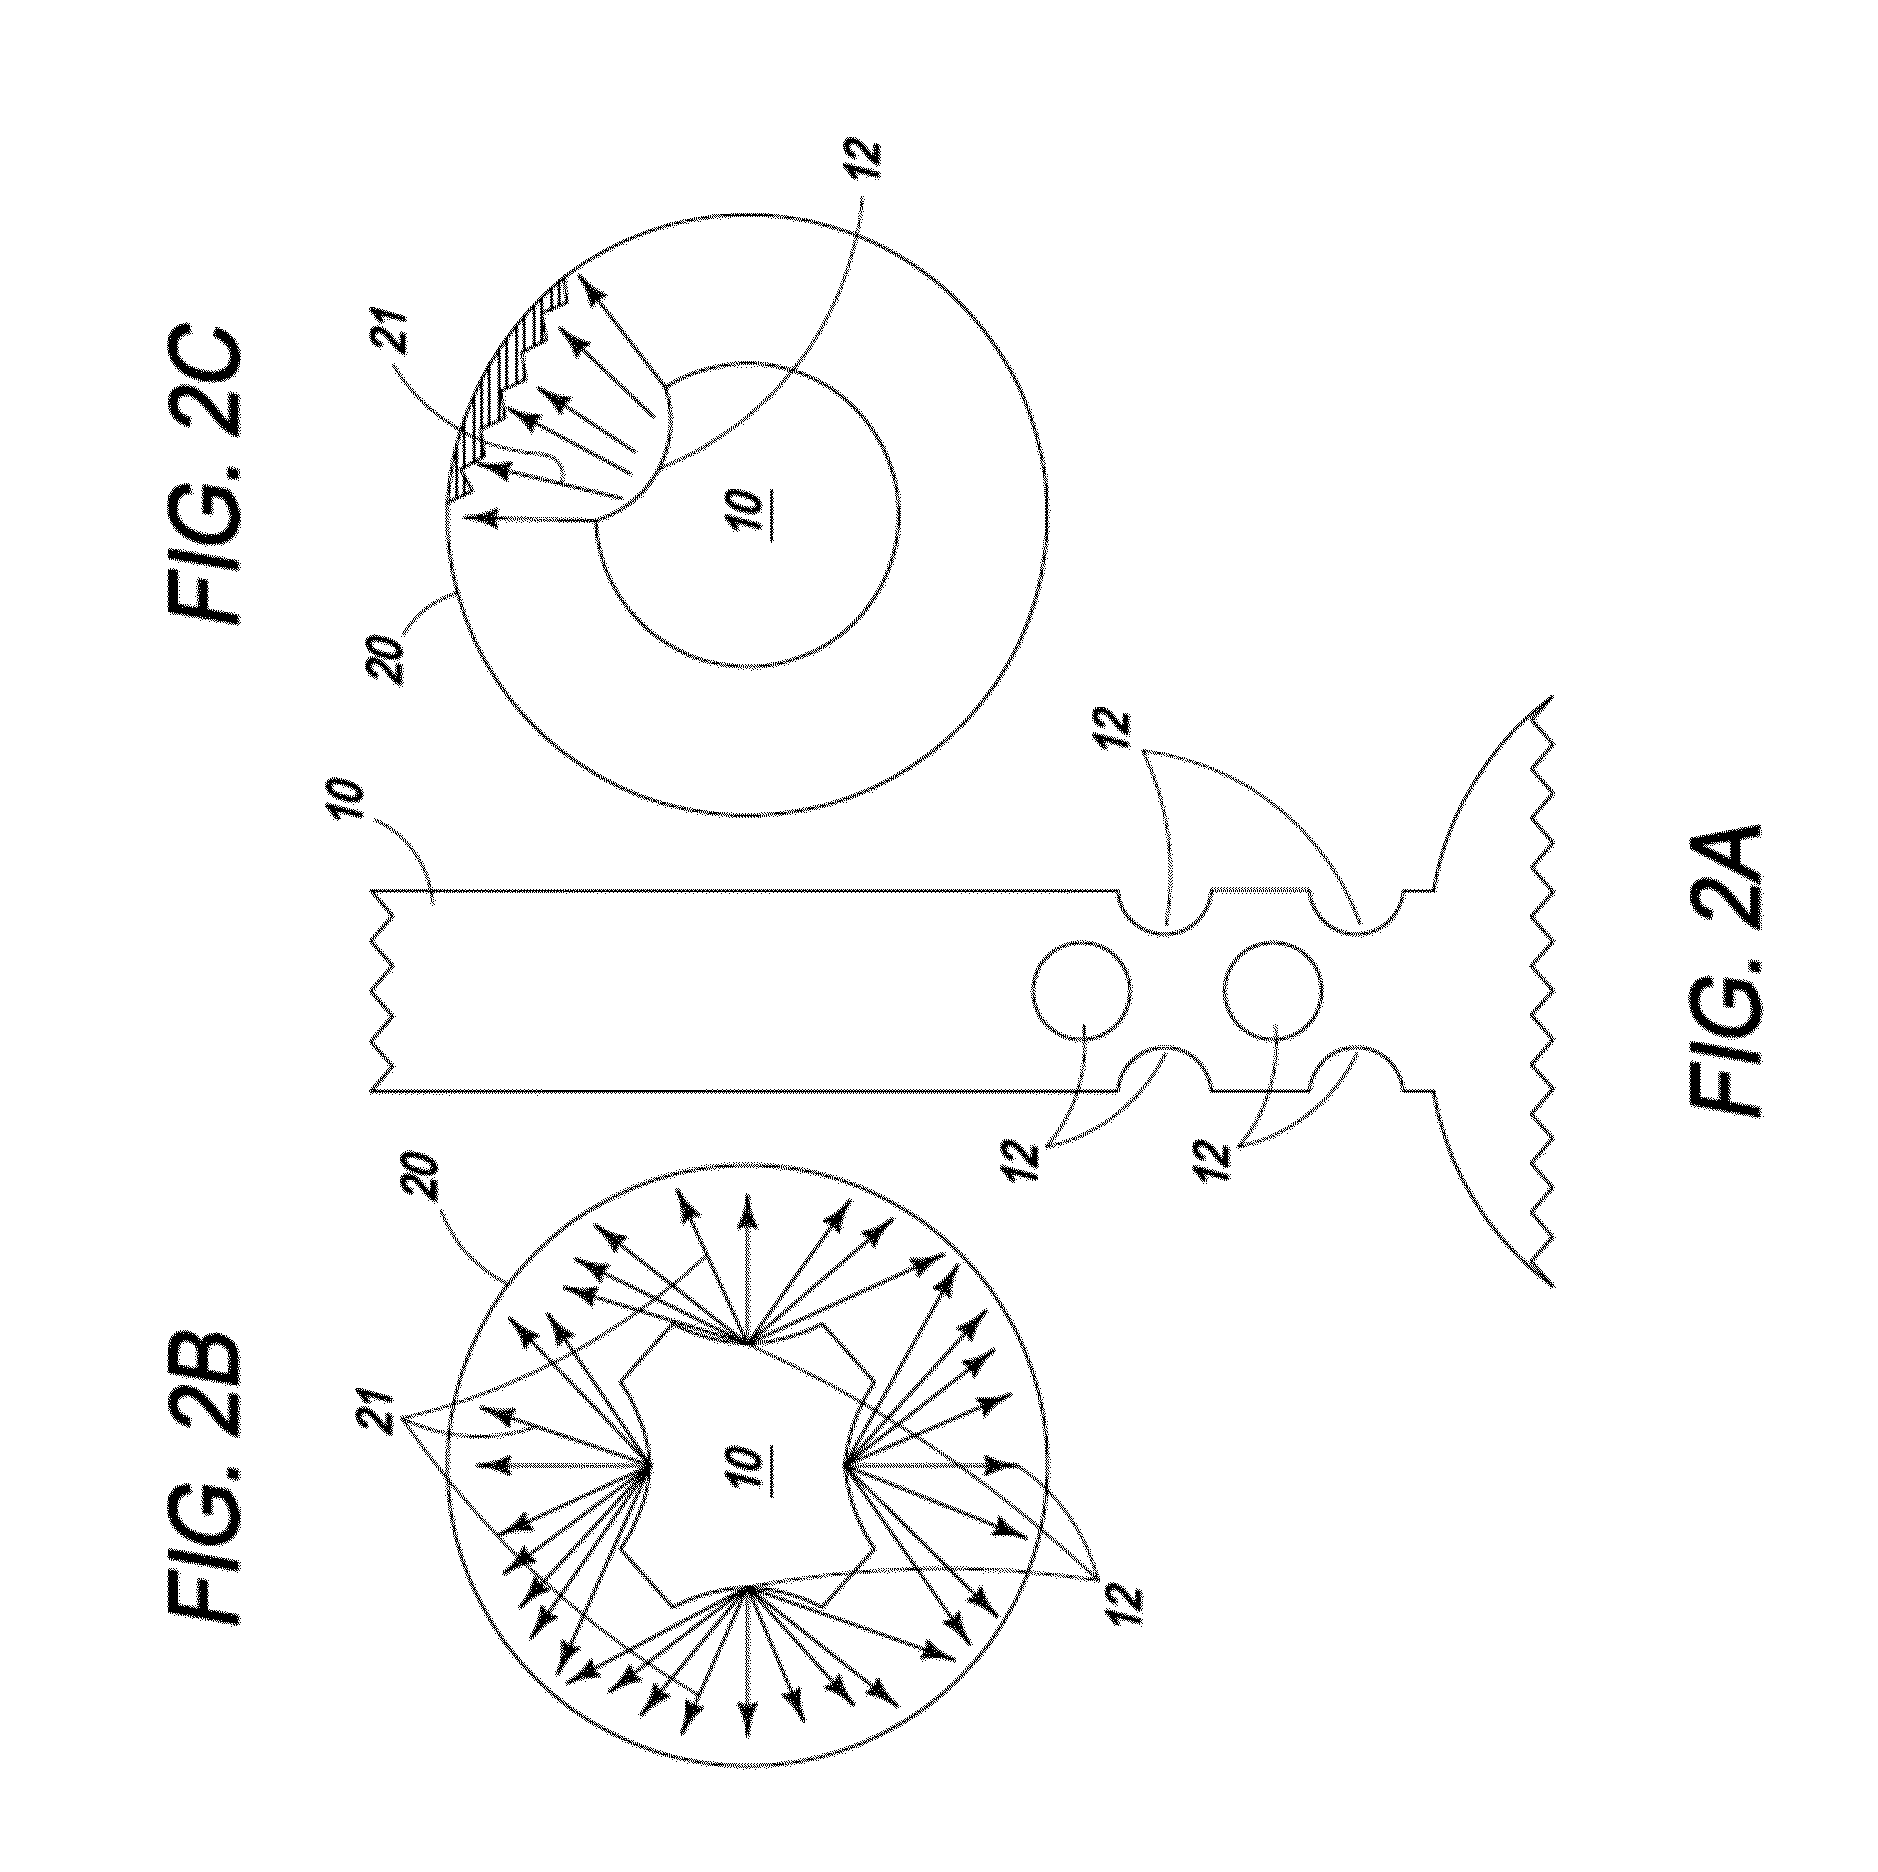 Method and Apparatus for Tissue Ablation